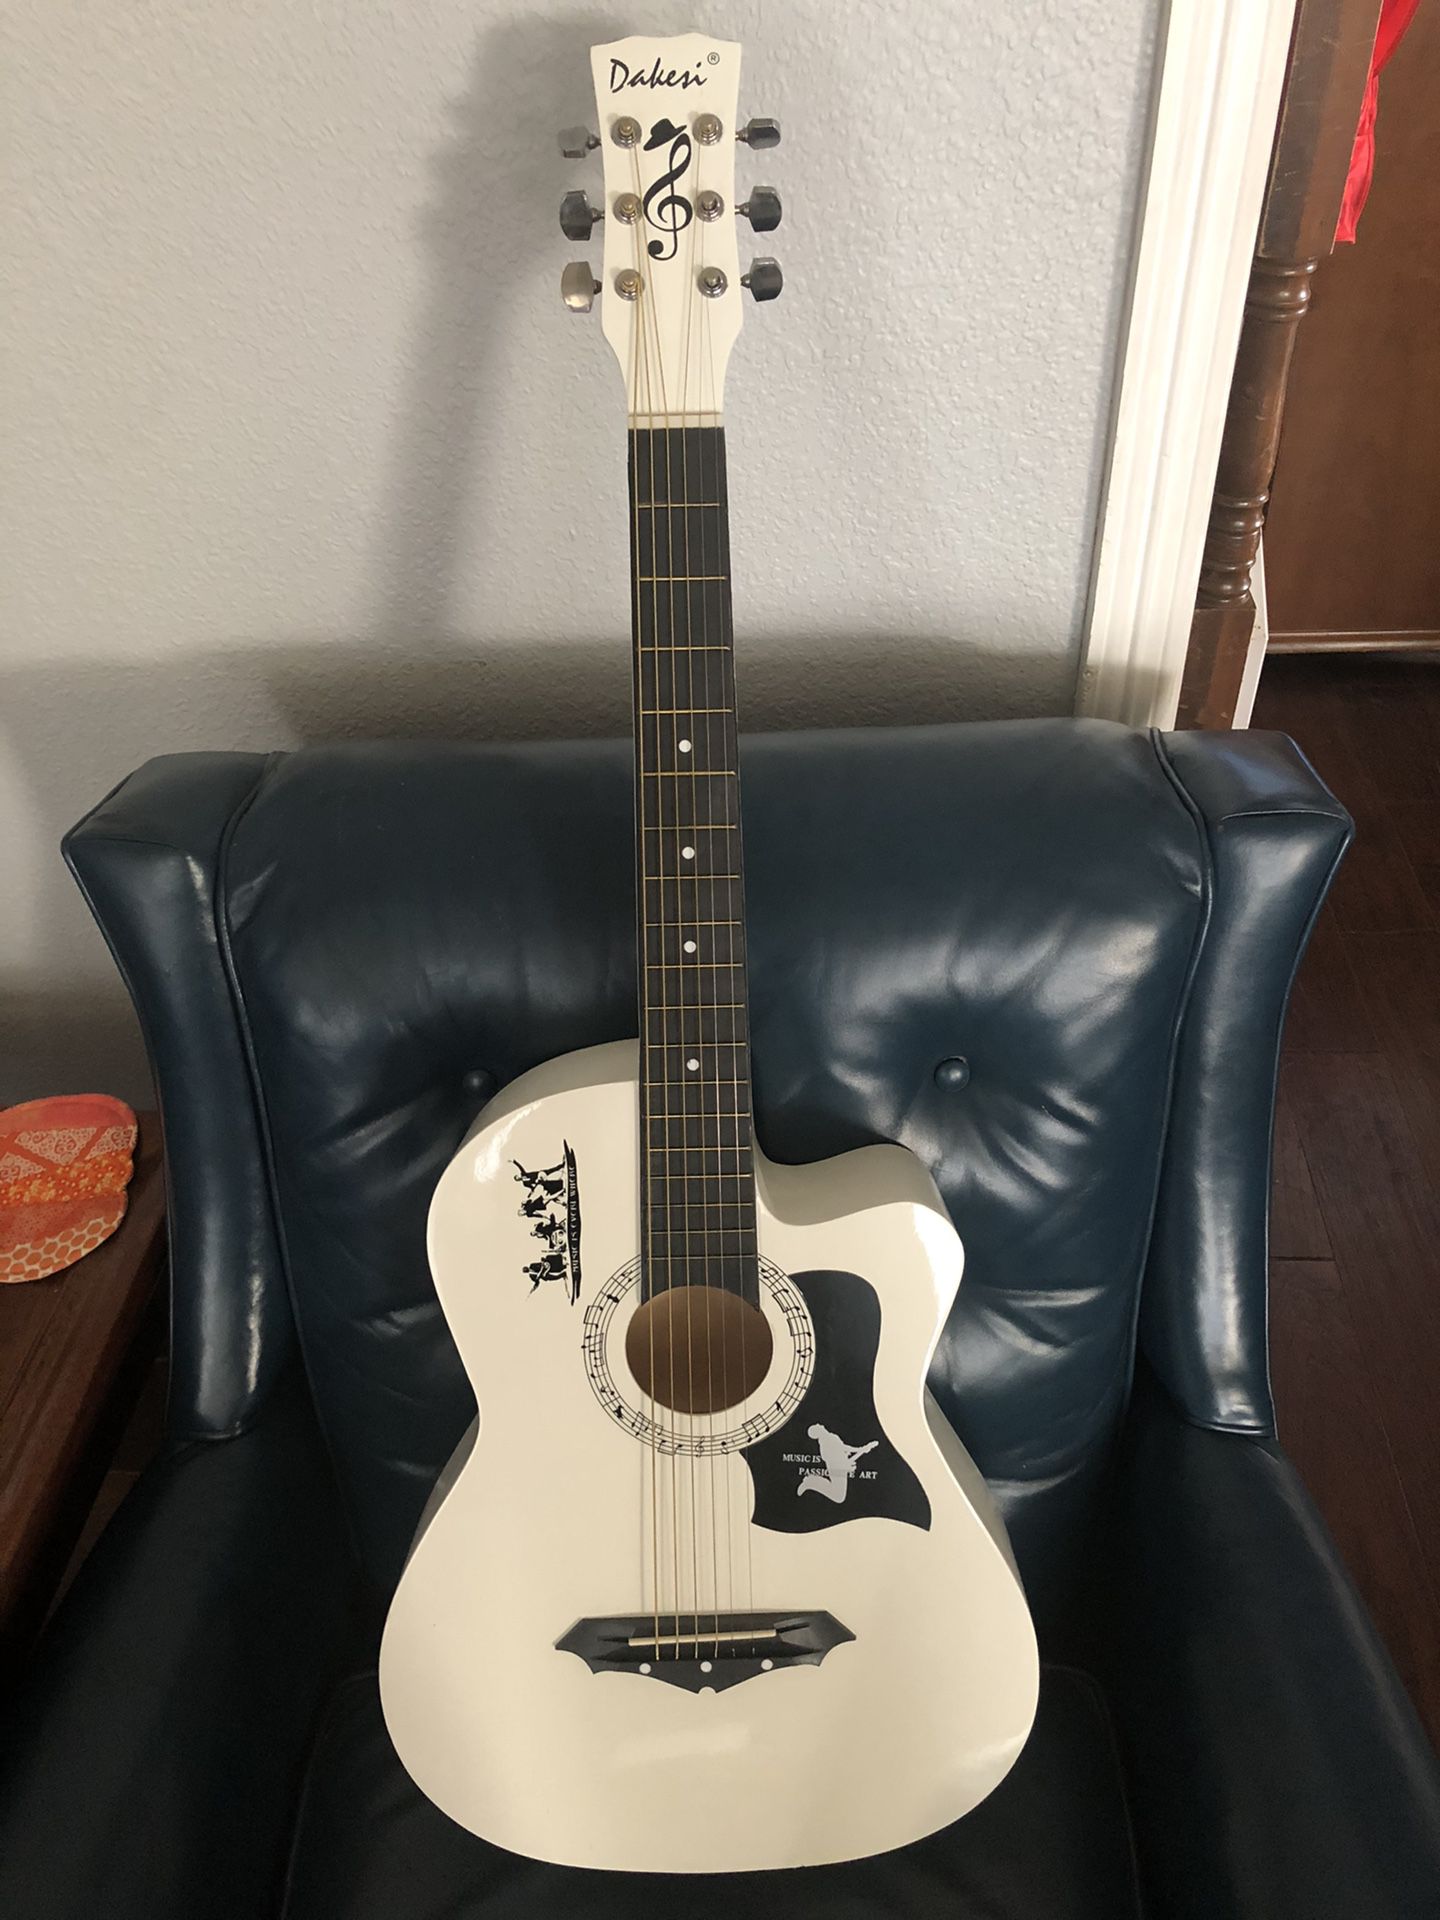 7/8 Size White Country Acoustic Guitar with Extra Strings, Cover, Pick, Strap $50 Firm